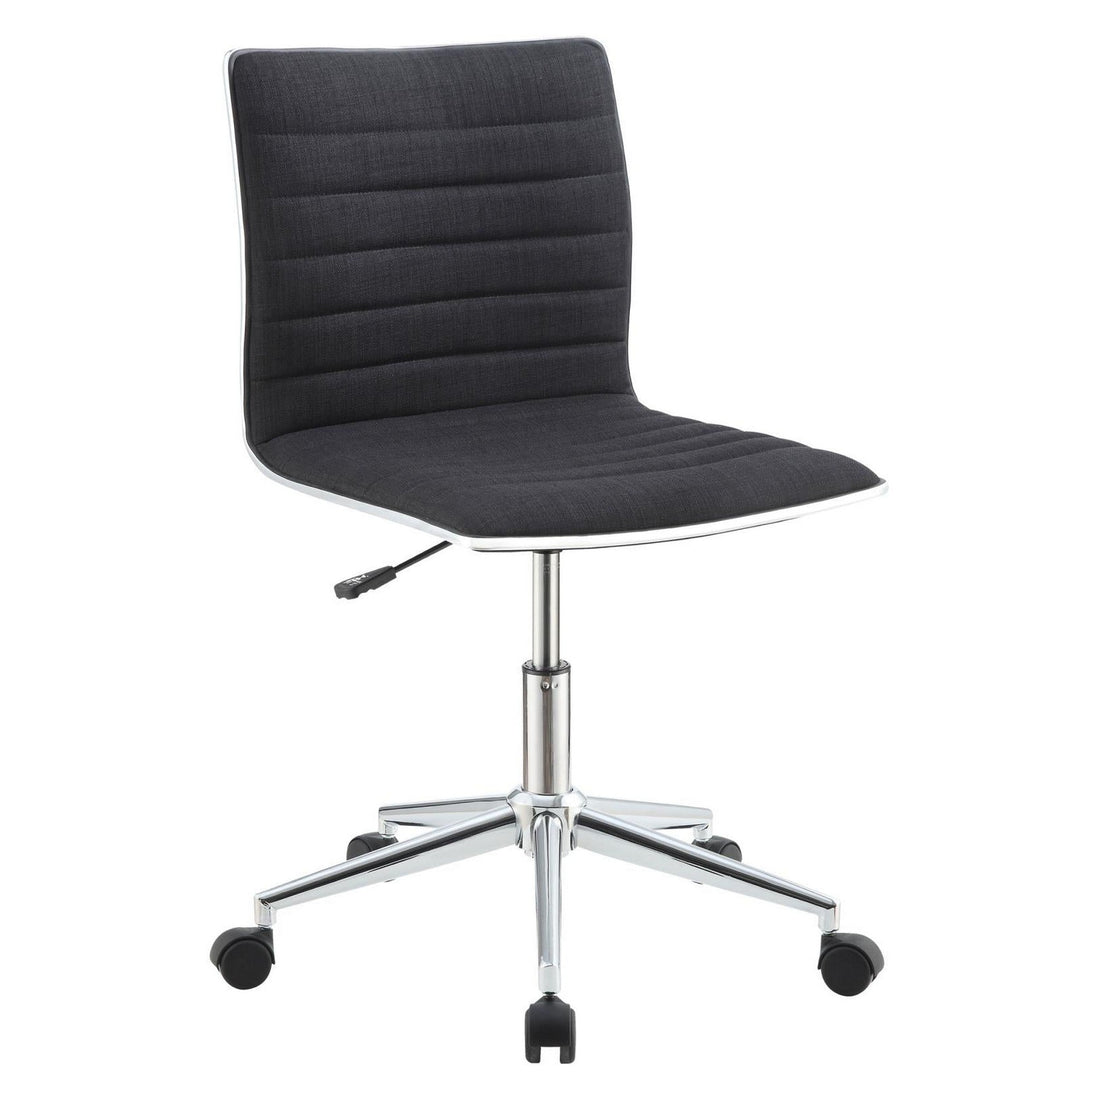 Chryses Adjustable Height Office Chair Black and Chrome 800725